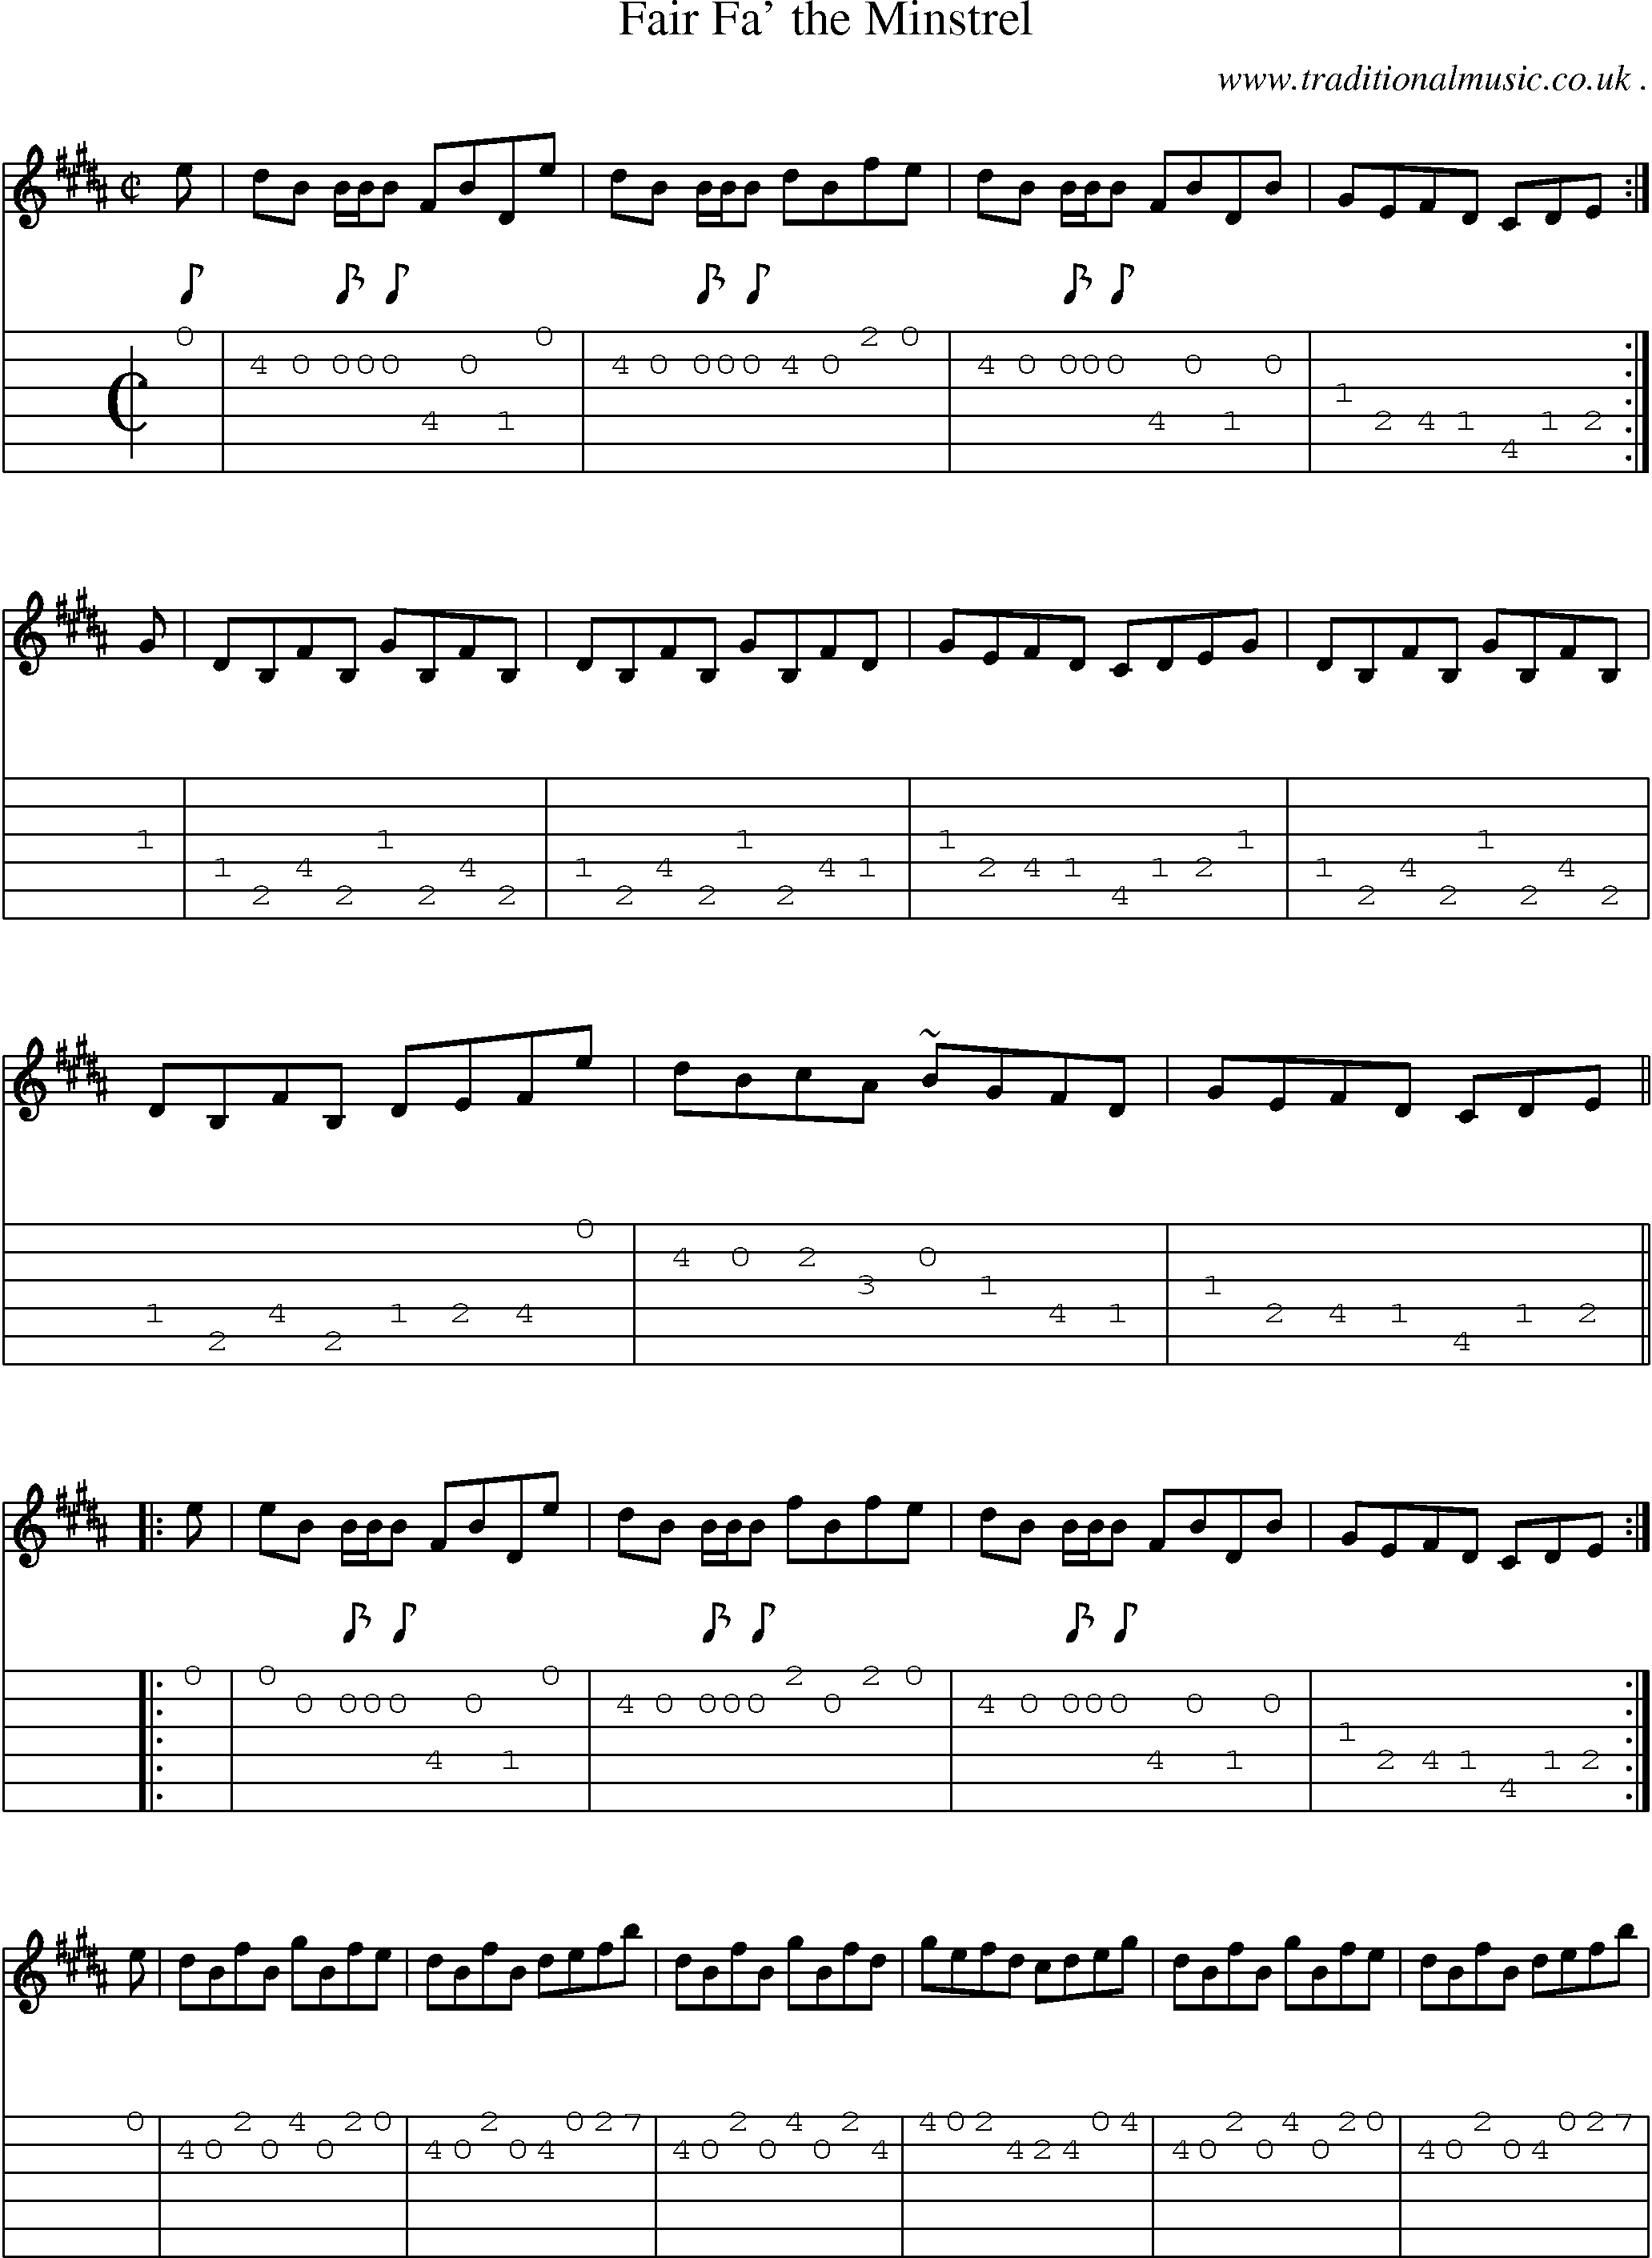 Sheet-music  score, Chords and Guitar Tabs for Fair Fa The Minstrel